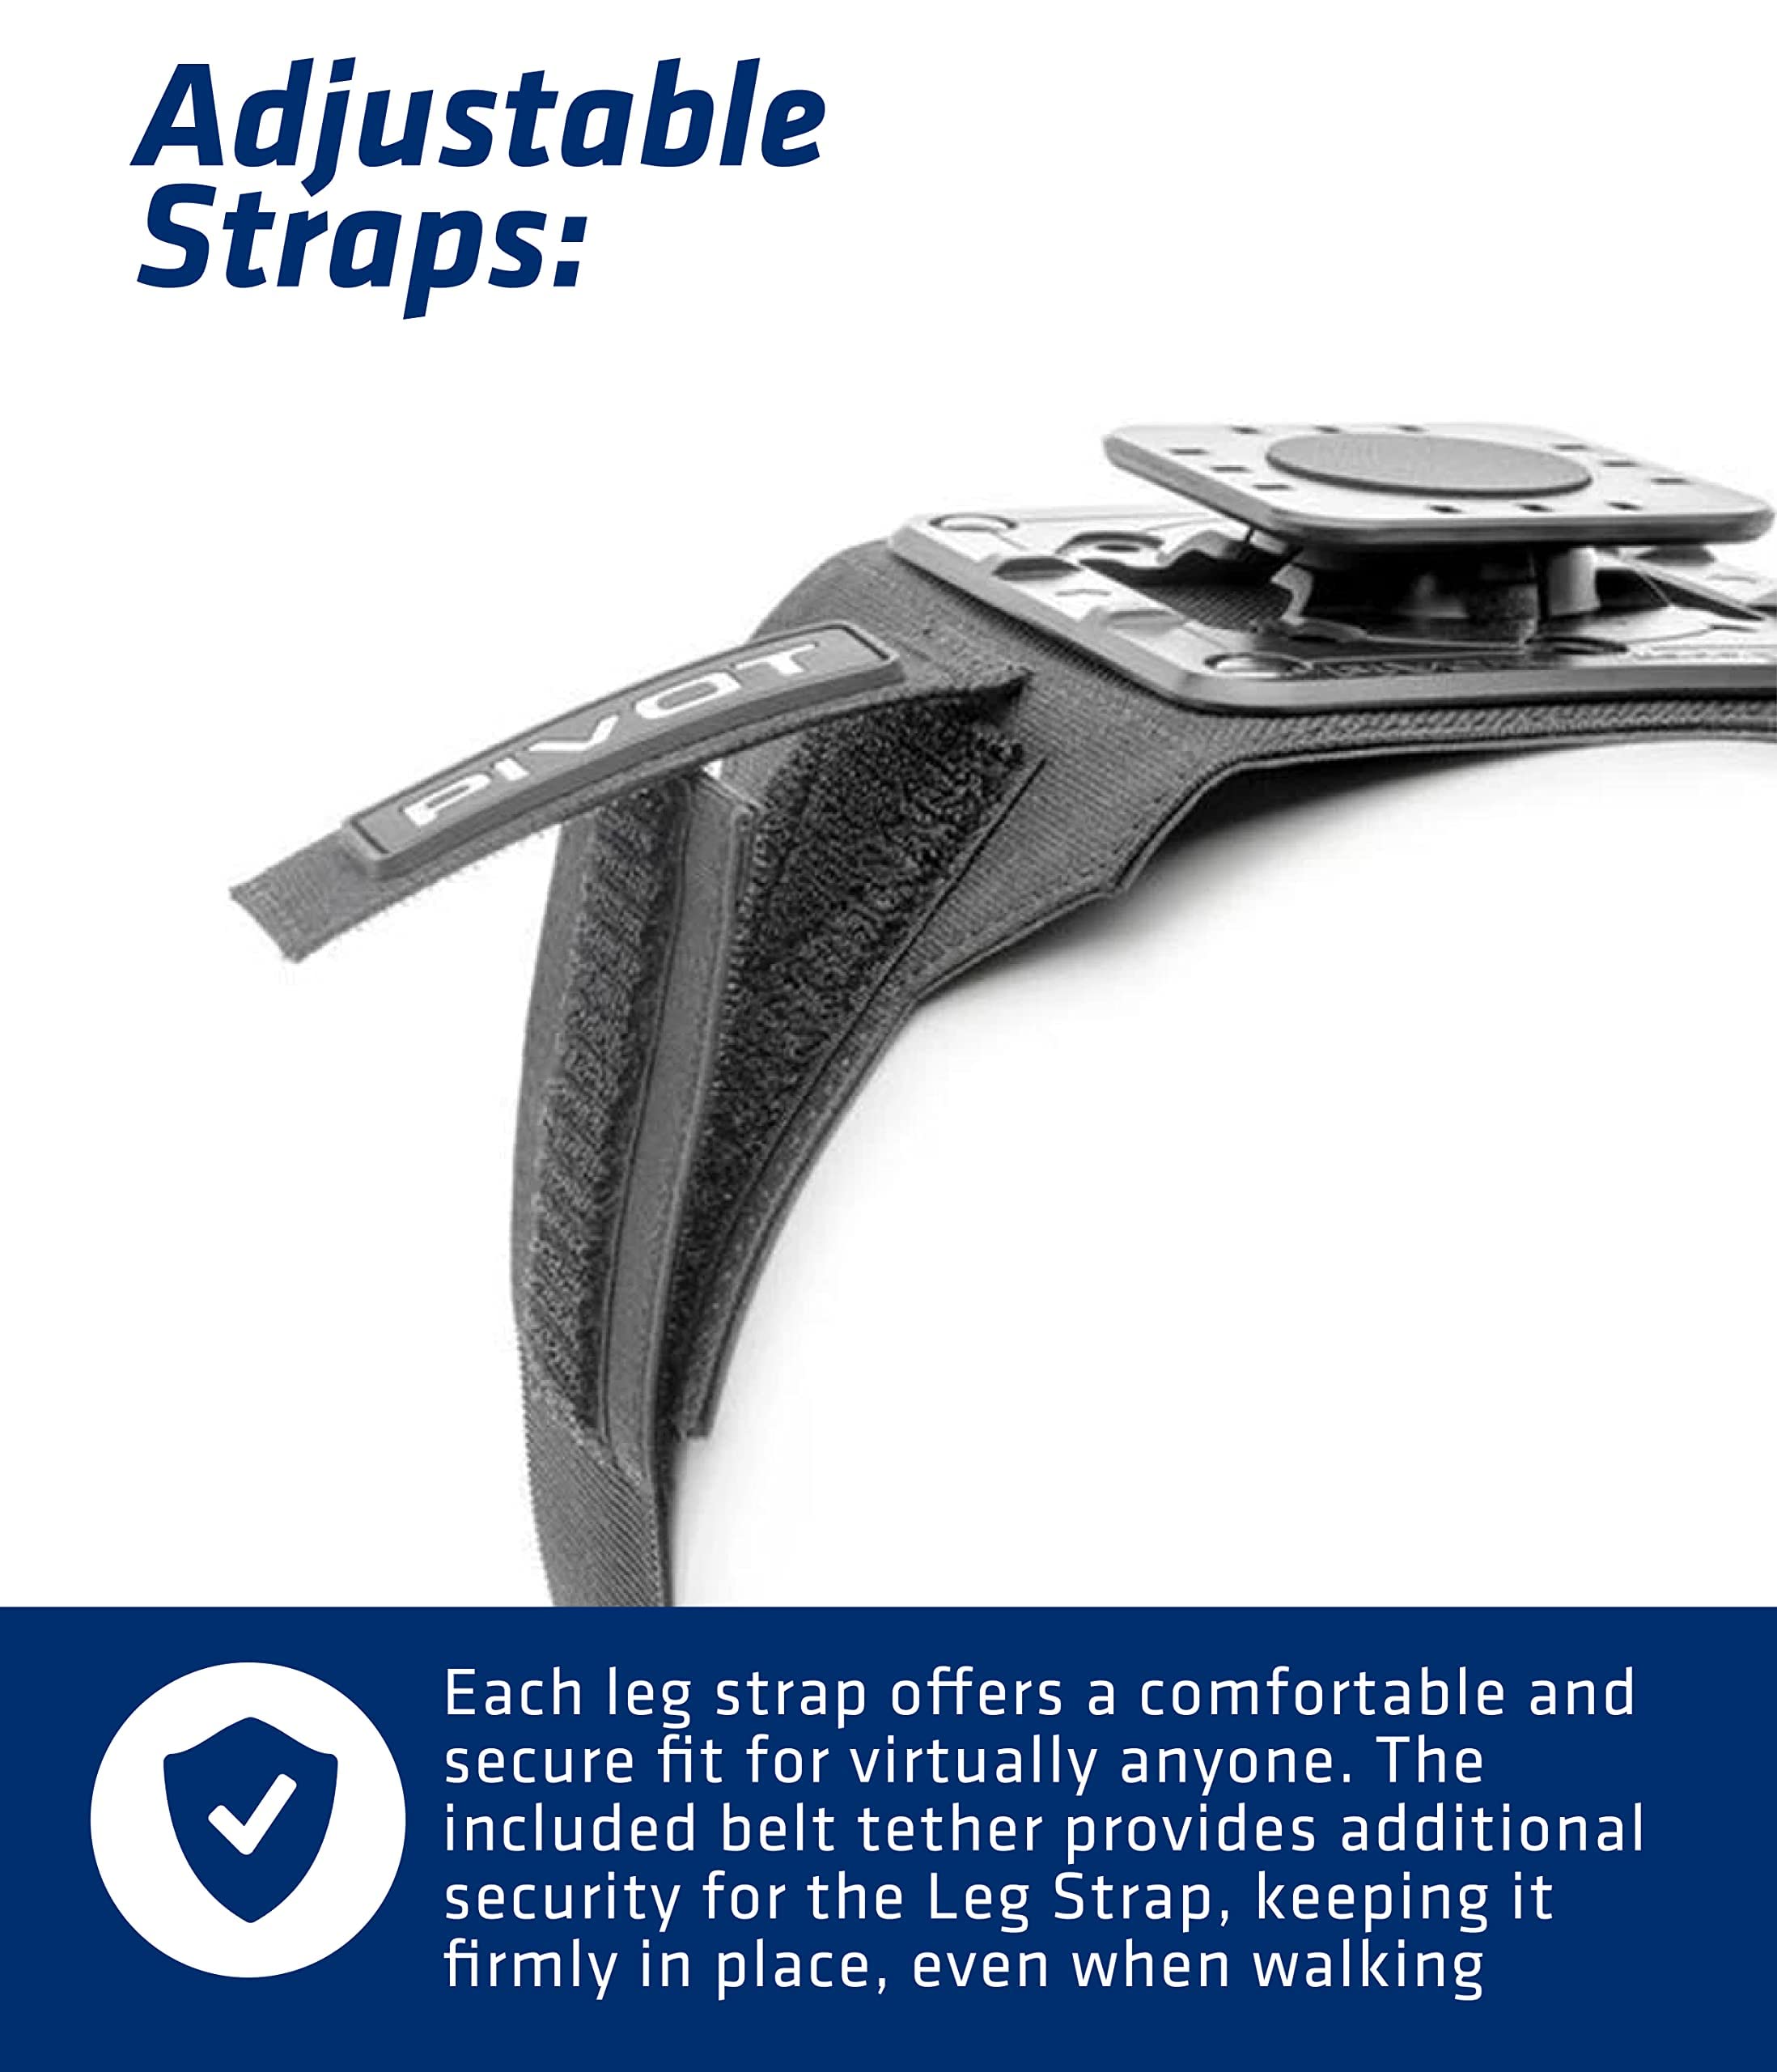 PIVOT Leg Strap - Supports Multi-Angle Display and Viewing - for Professional Pilots, General Aviation